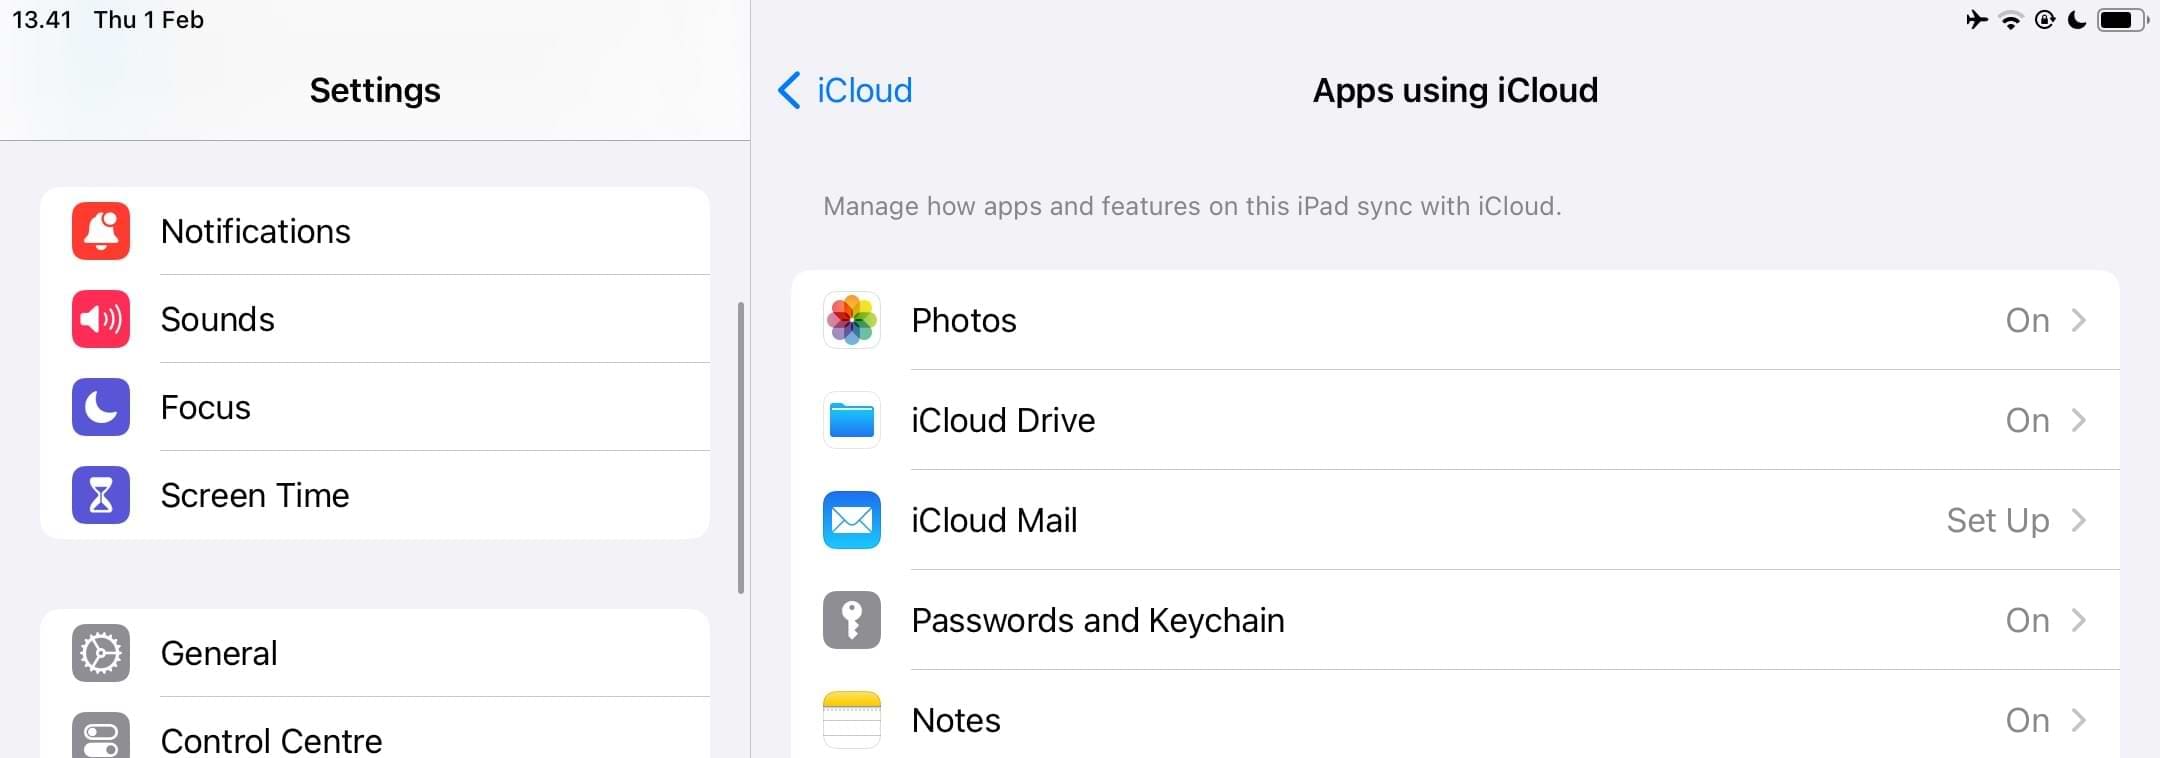 Select Notes in the Apps Using iCloud Section